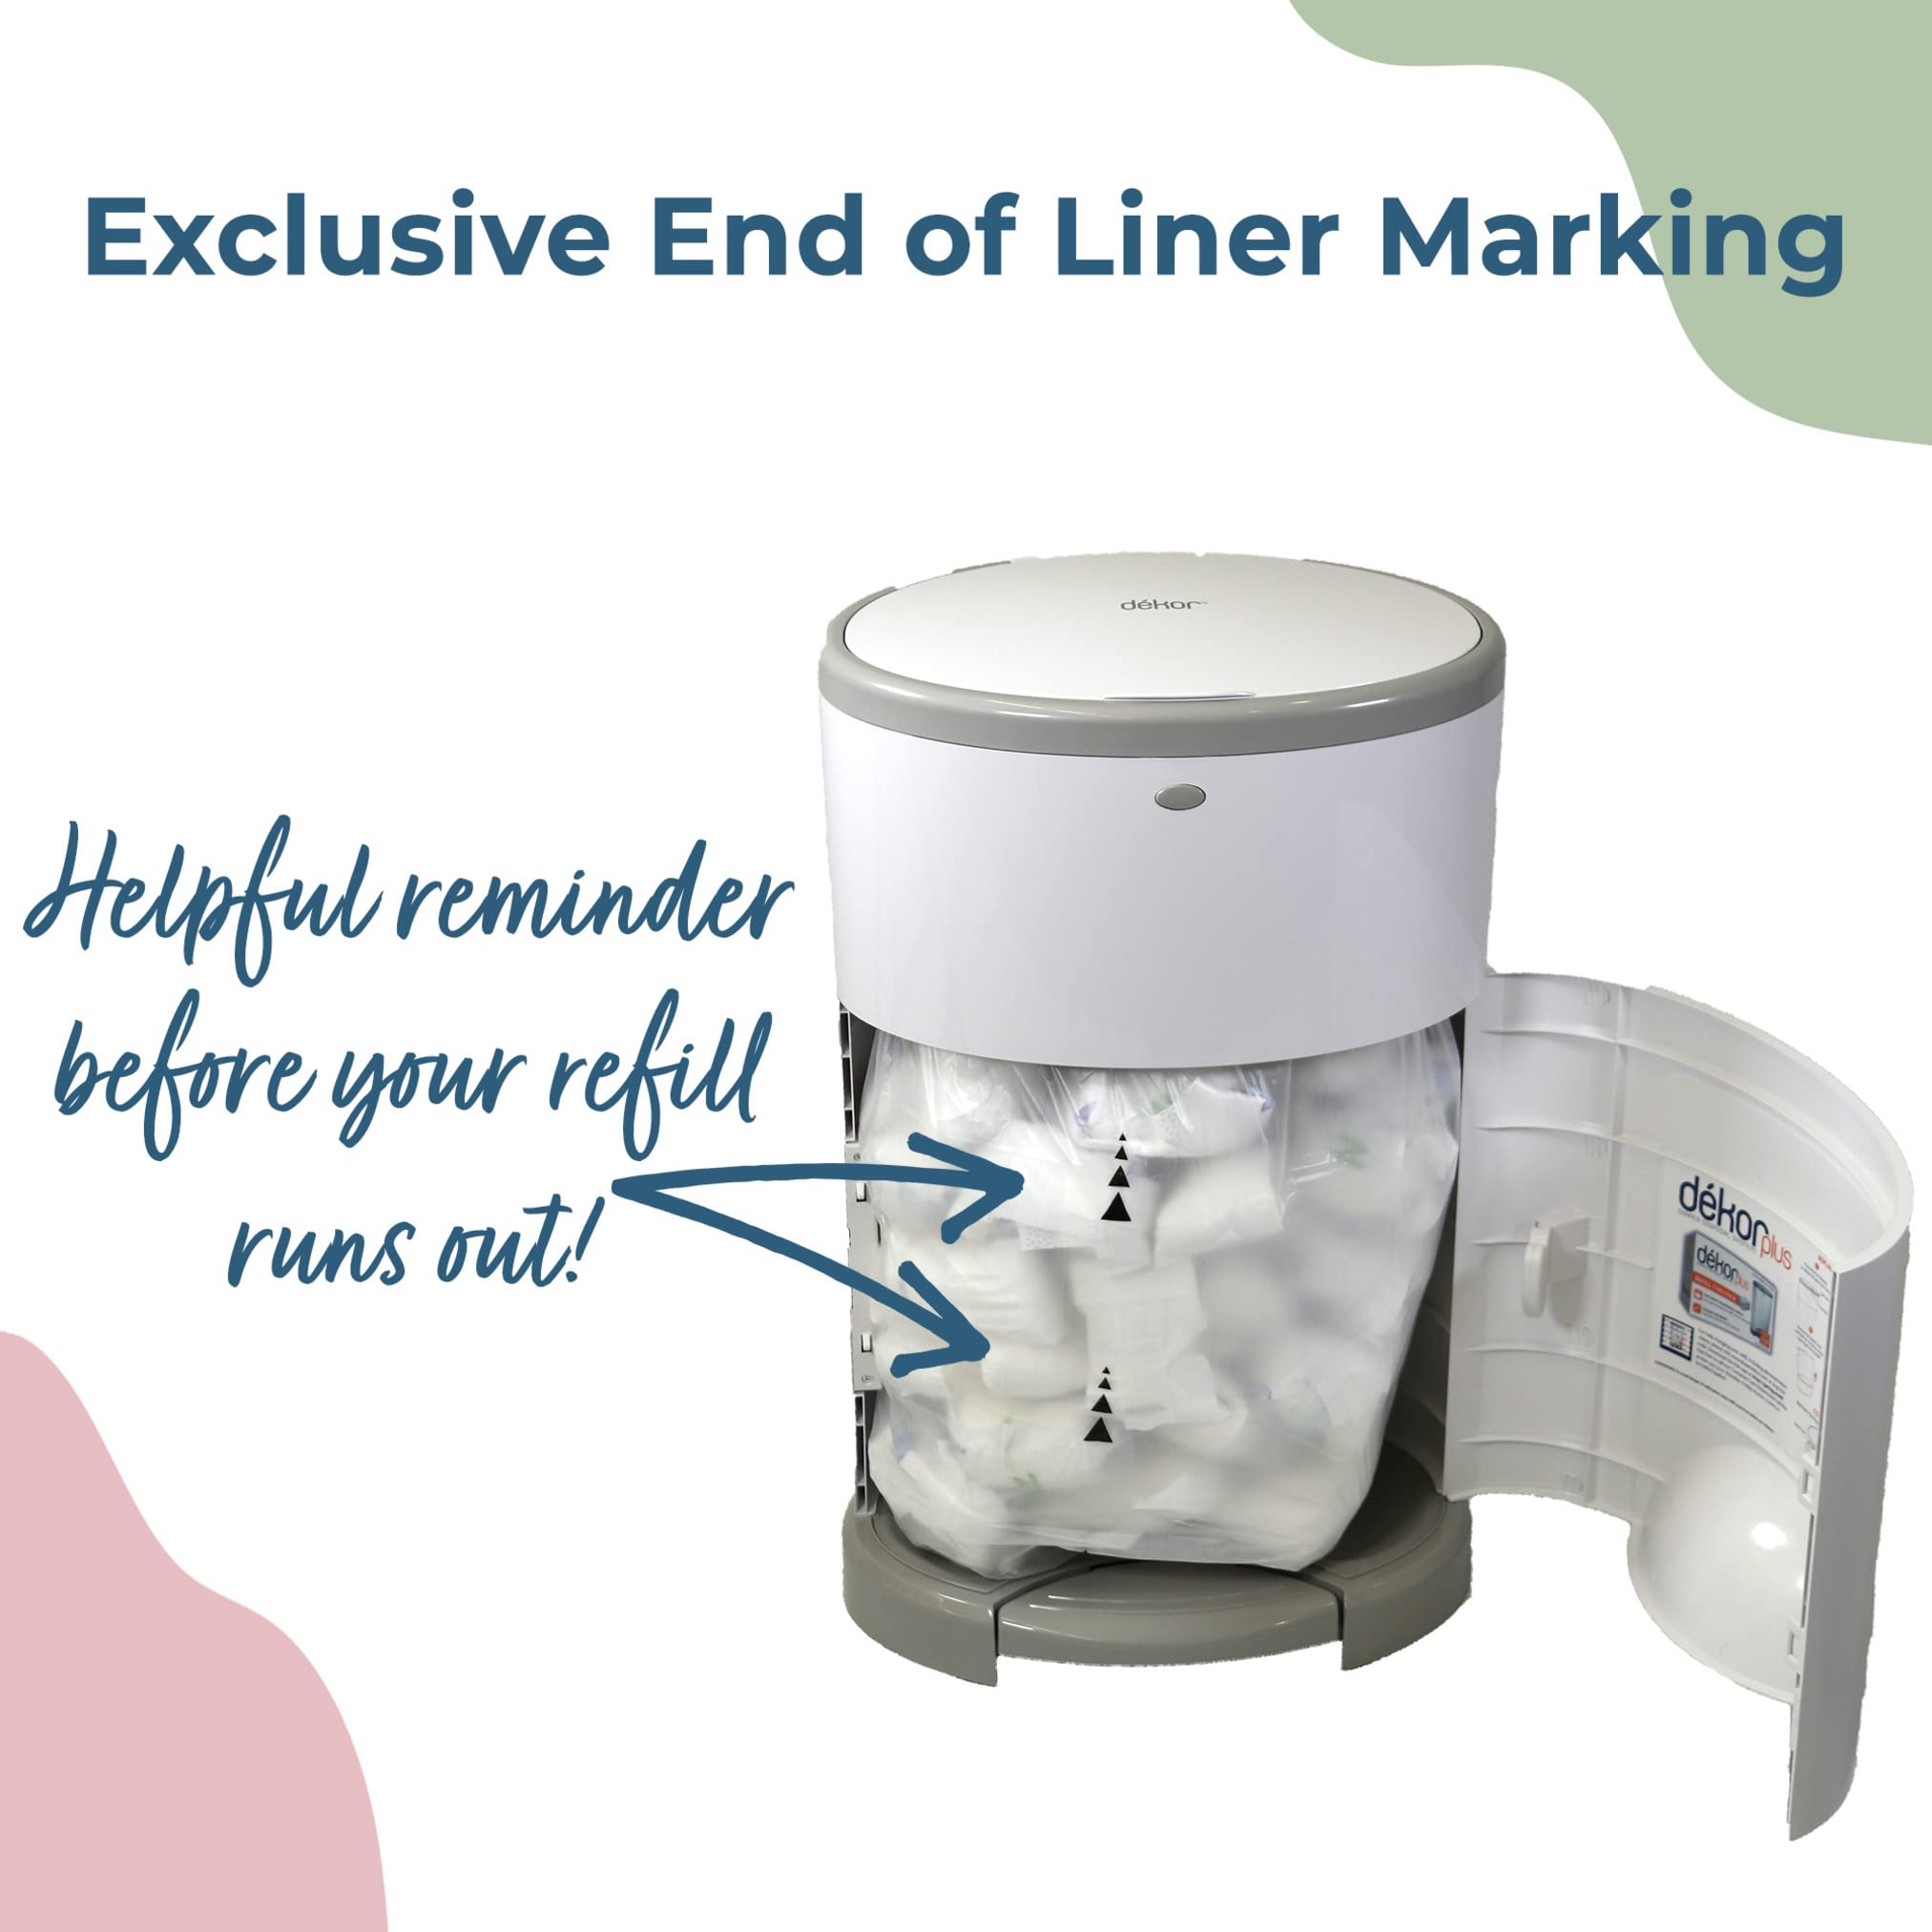 Dekor Mini Diaper Pail Refills | 2 Count | Most Economical Refill System | Quick & Easy to Replace | No Preset Bag Size – Use Only What You Need | Exclusive End-of-Liner Marking | Baby Powder Scent